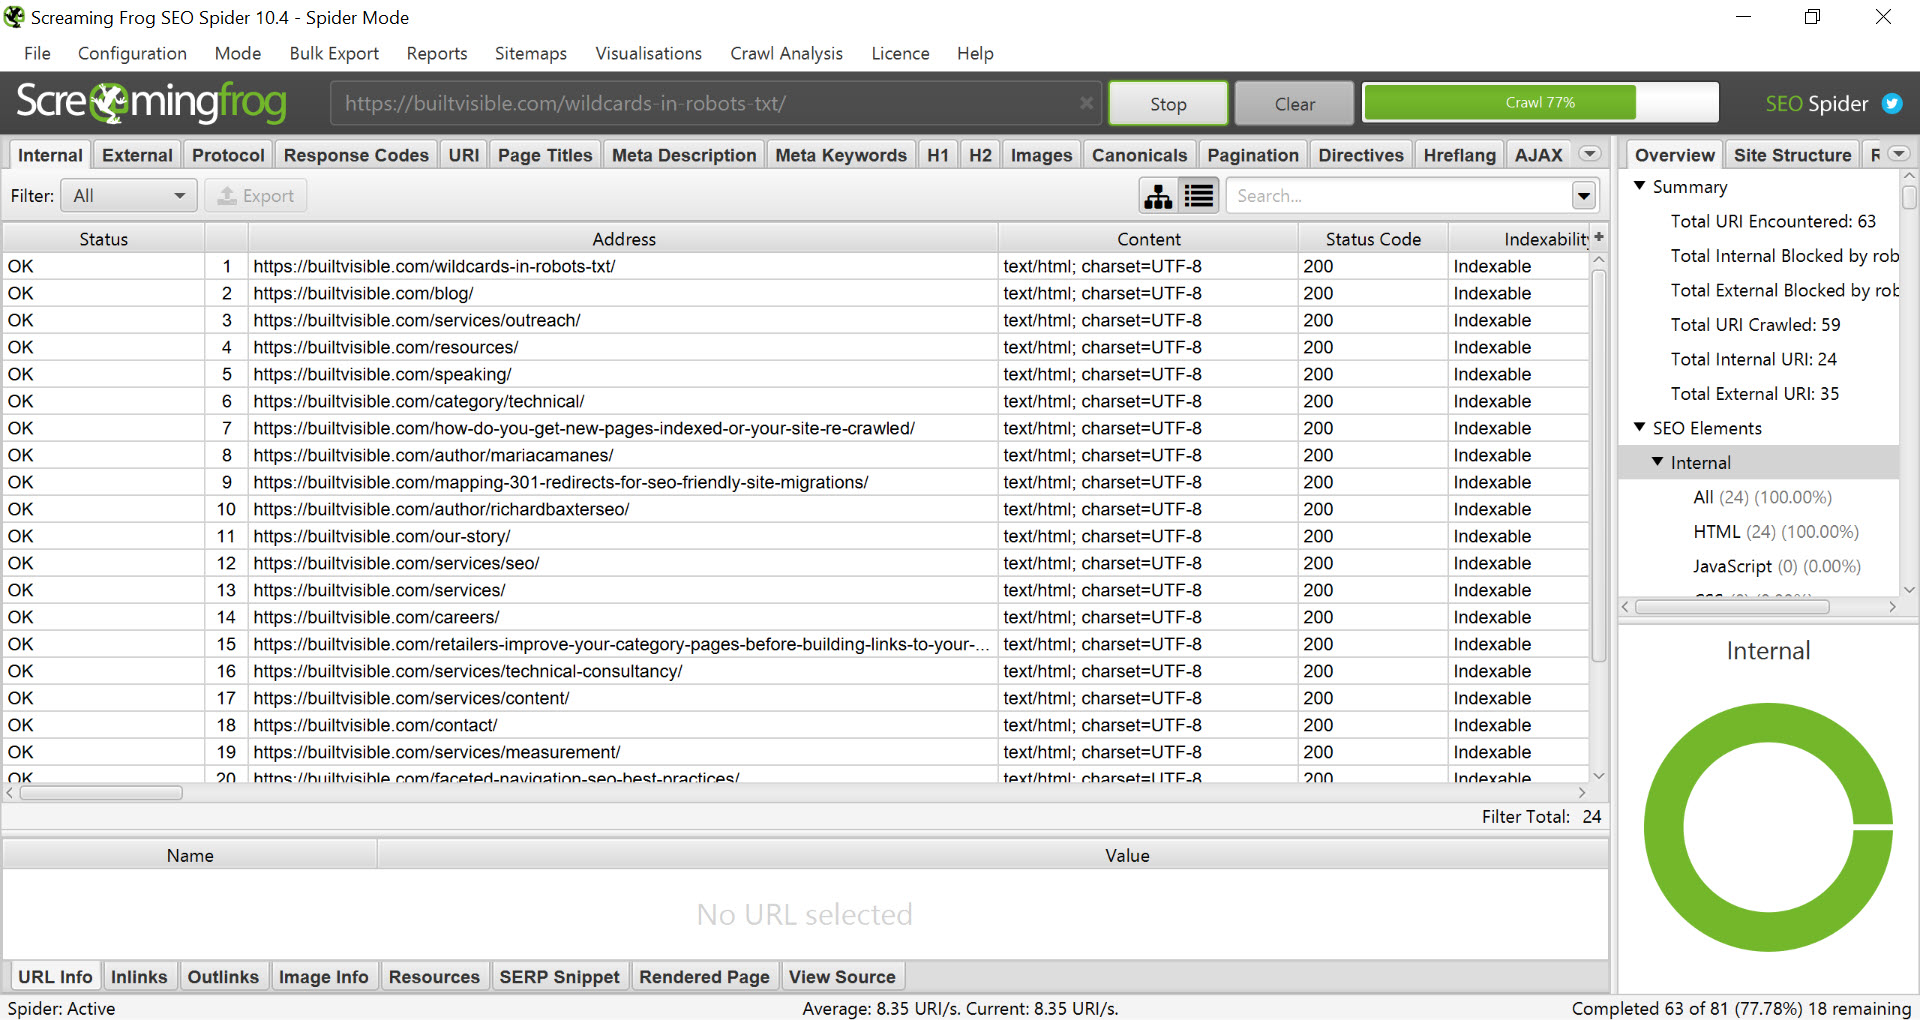 screamingfrog in spider mode